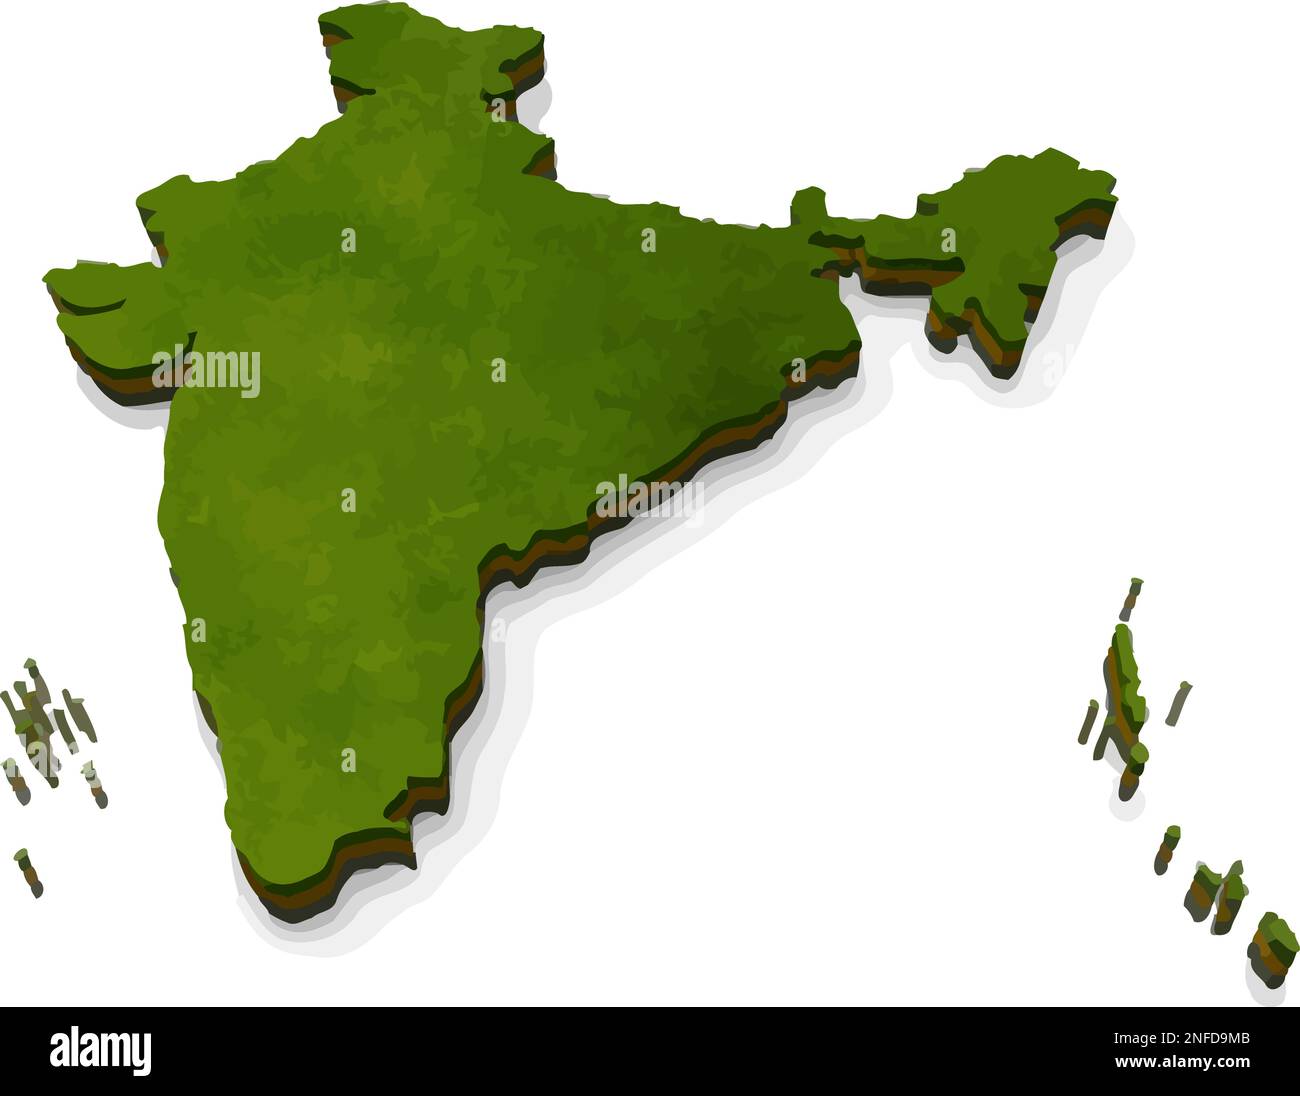 Mini map of India in vector illustration with realistic land. Stock Vector